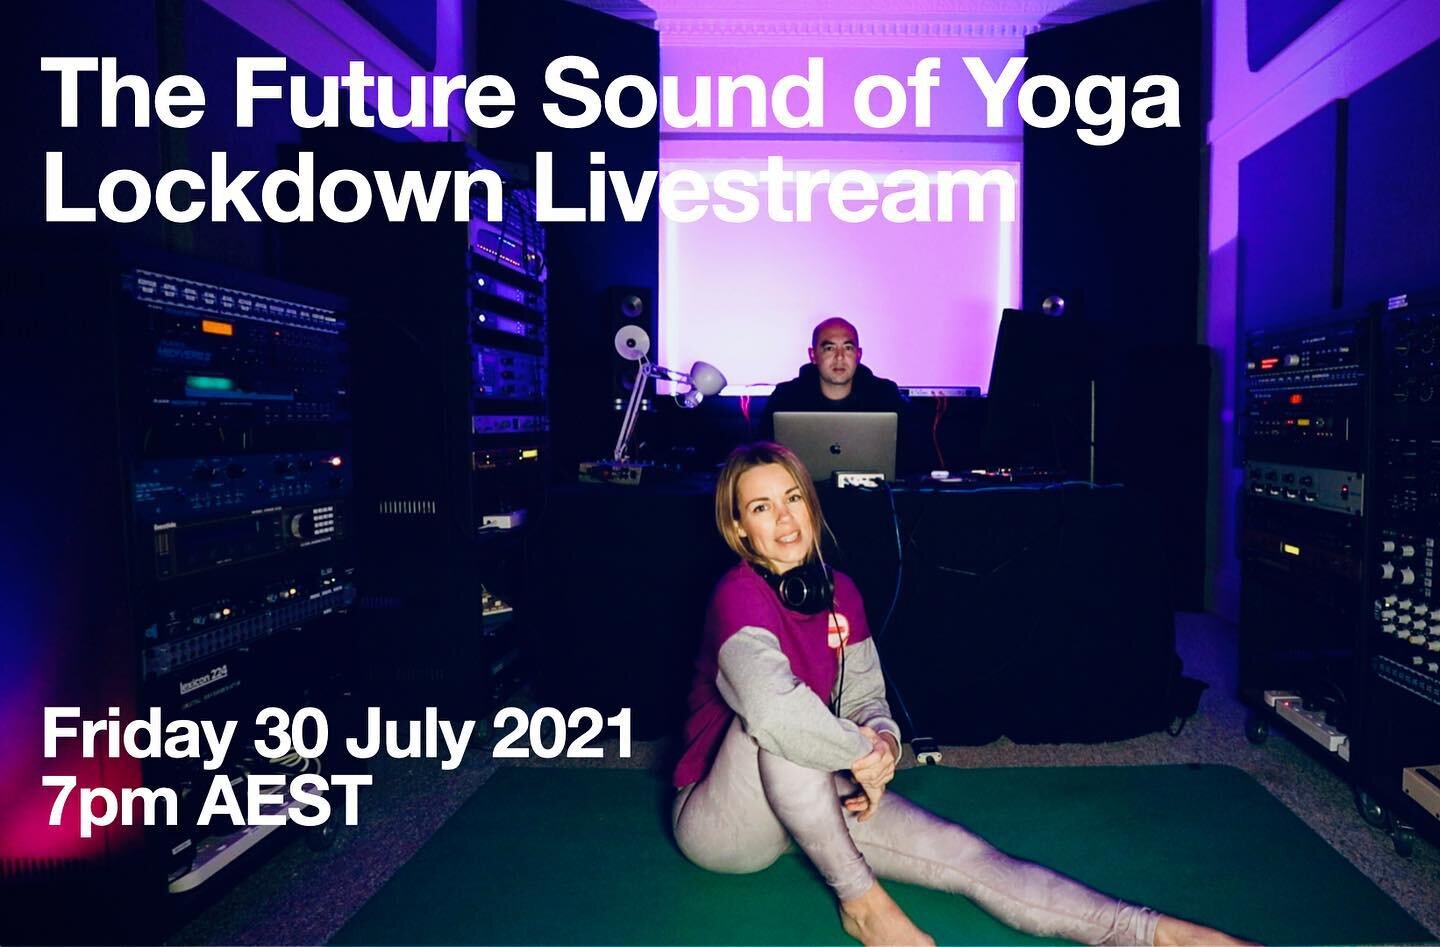 This Friday @angel_singmin and I will be live-streaming a Future Sound of Yoga session direct from the studio here in Bondi Beach.

We hope to transmit some grounding movement and hypnotic music as an antidote to lockdown vibes.

Link in bio!

#globa